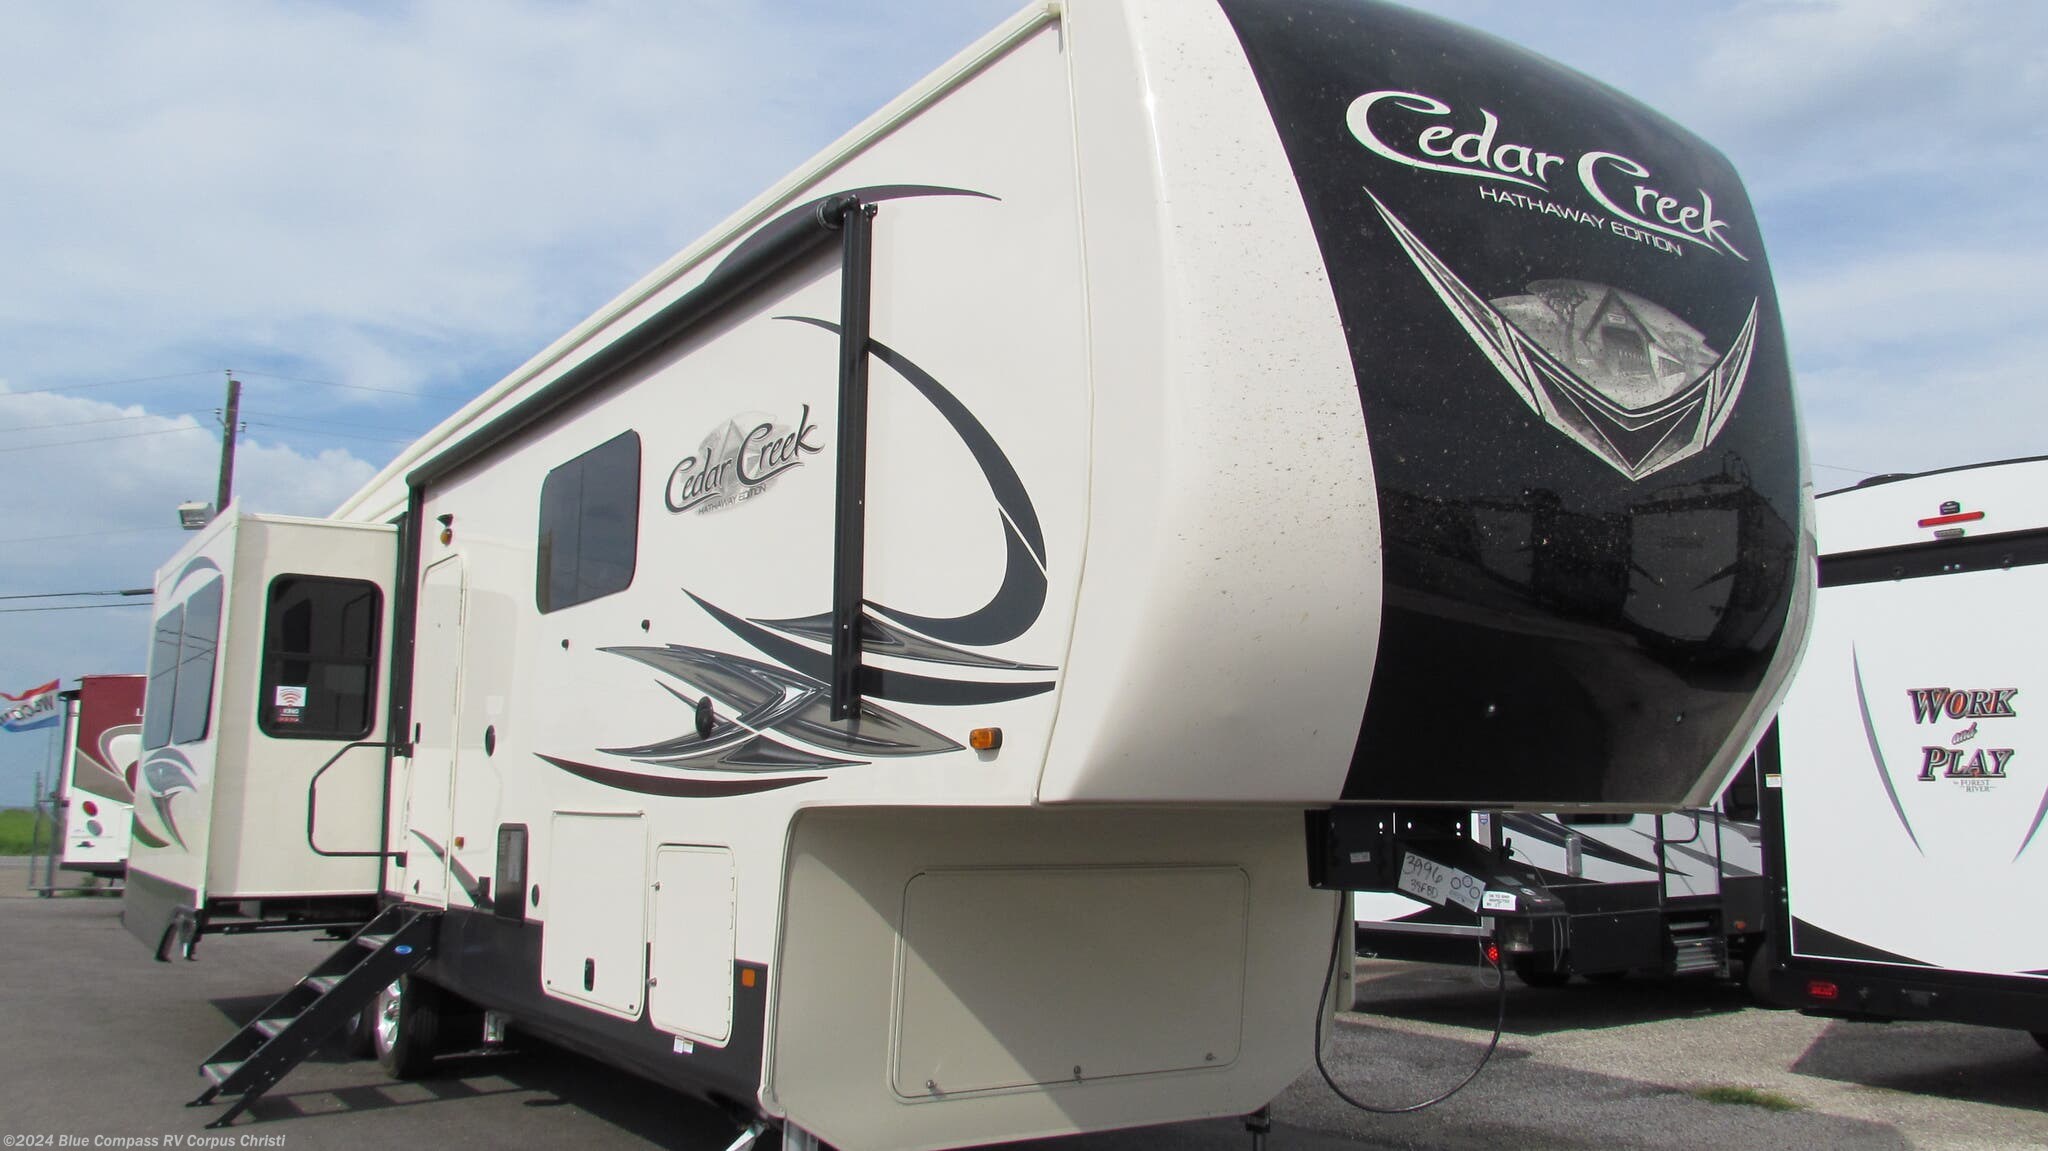 Rv Dealer In Corpus Christi Texas Selling Servicing Rvs Since 2003